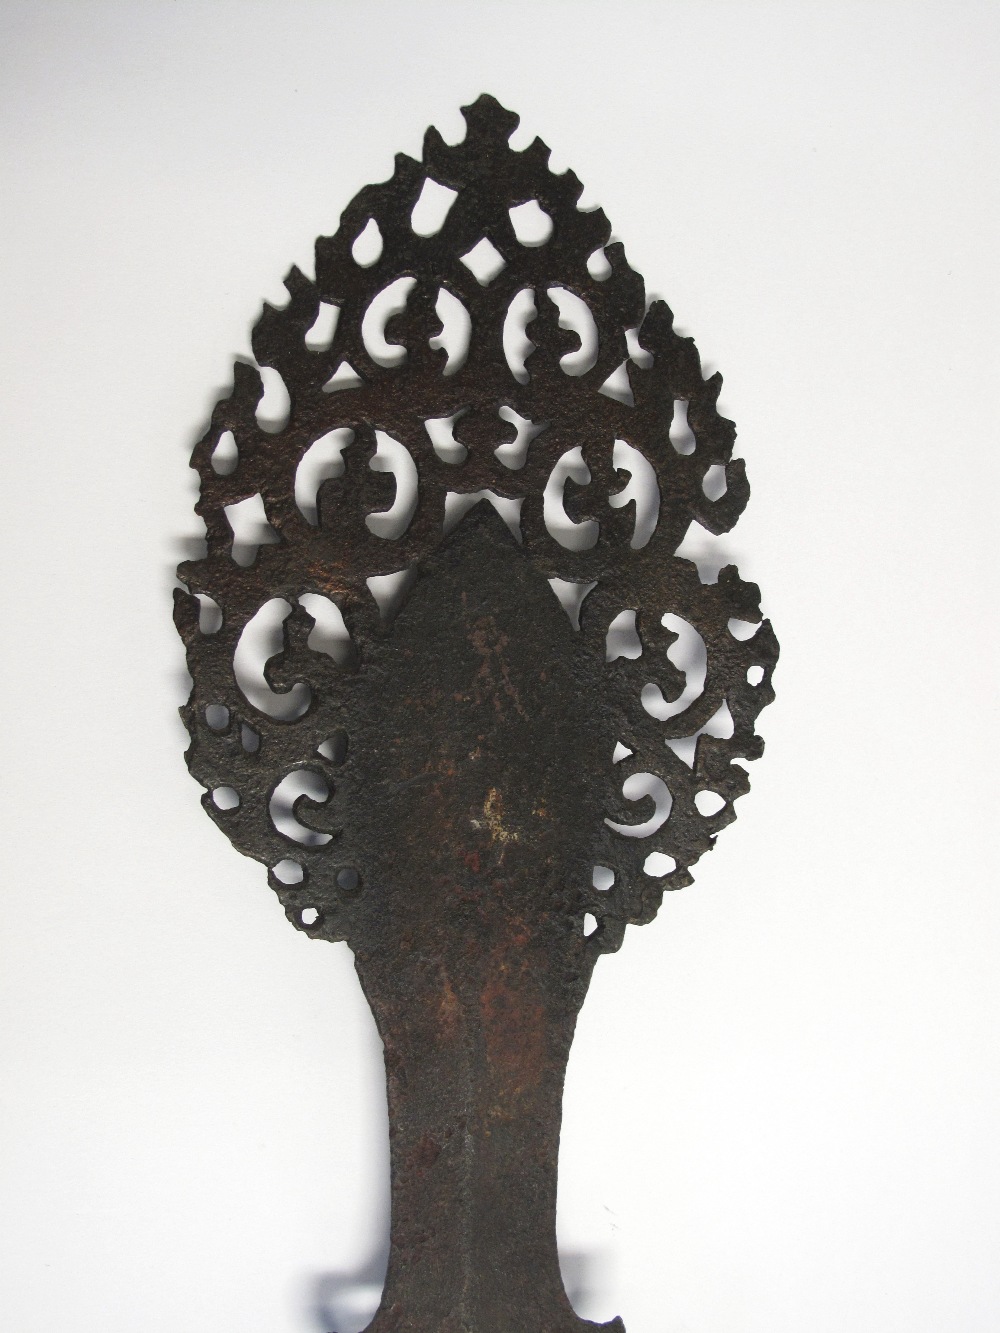 A RITUAL SWORD EMBLEM, TIBET, CIRCA 18TH CENTURY from a large Buddhist image, the blade fringed with - Image 2 of 2